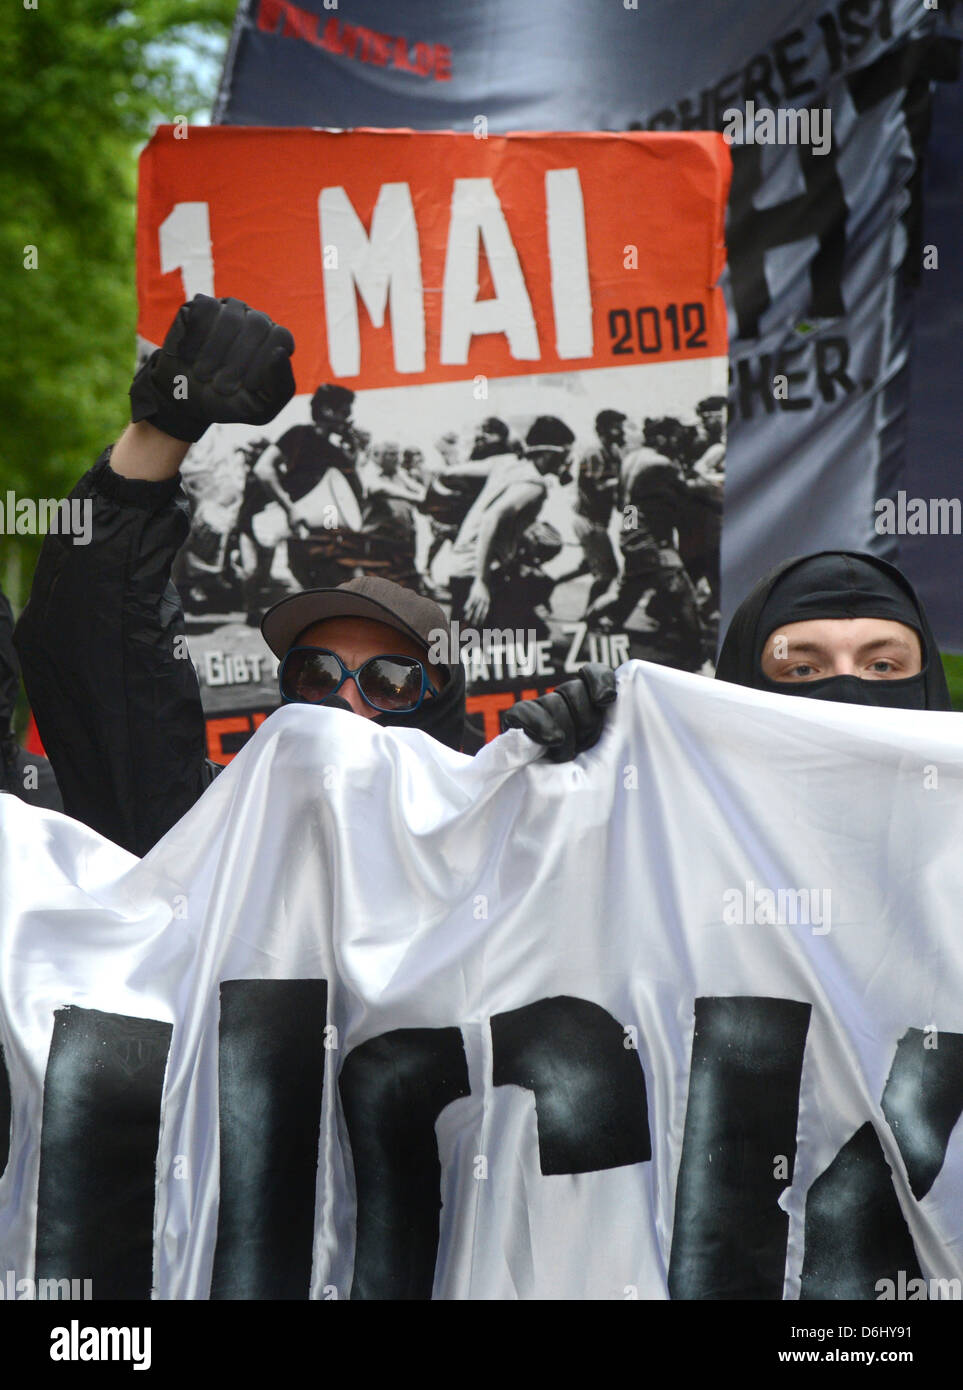 Berlin, Germany, on 1 demonstration May 2012 in Kreuzberg, Autonomous with protest banners Stock Photo